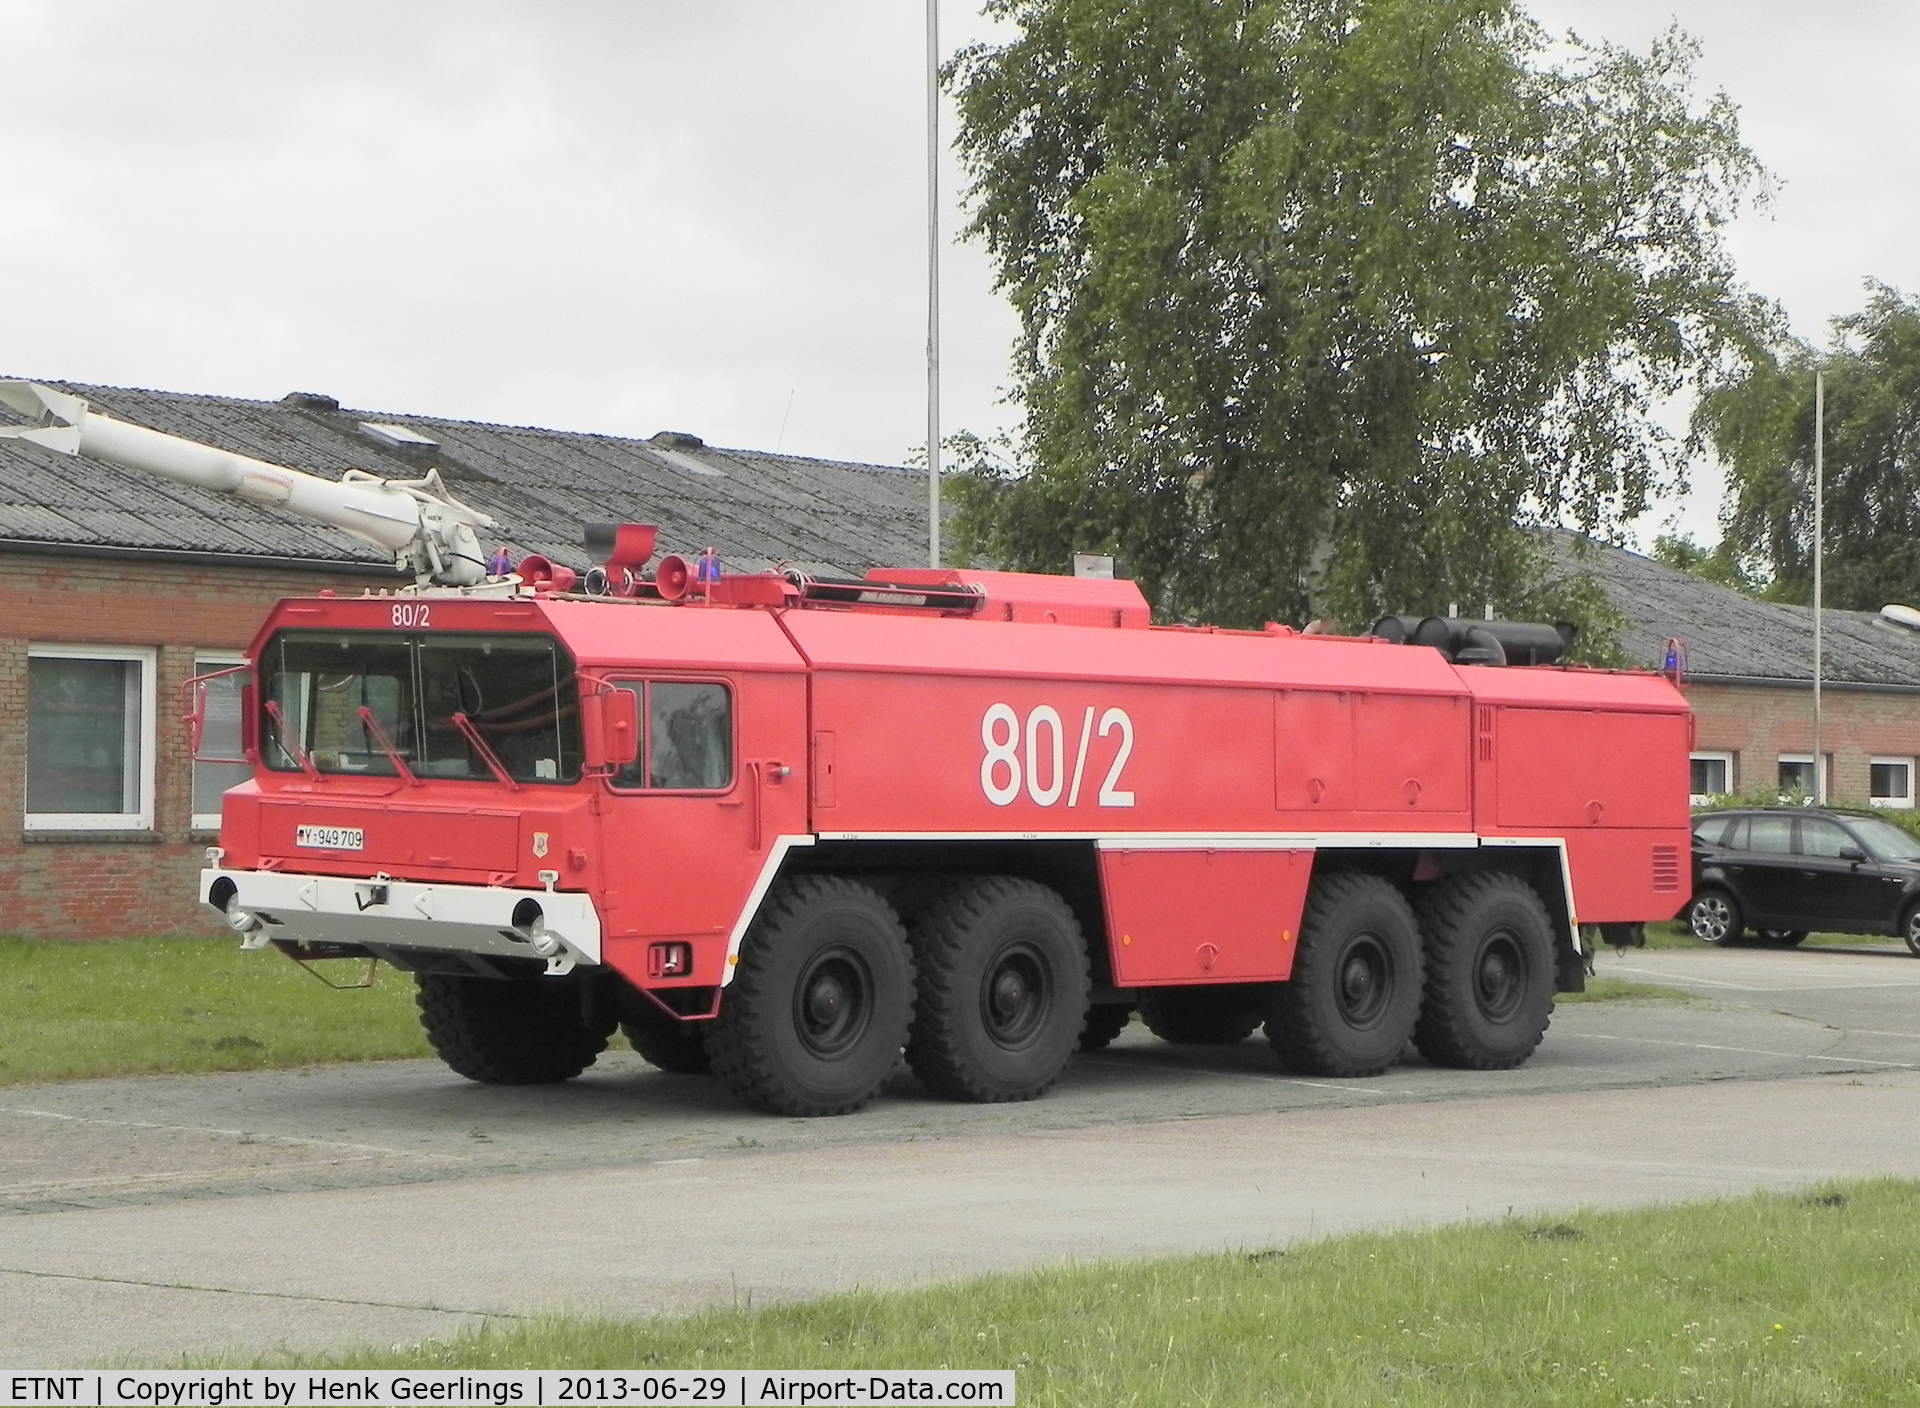 Wittmundhaven Airbase Airport, Wittmund Germany (ETNT) - Old Fire Engine.
Phantom F-4F Farewell Airshow at Wittmund AFB